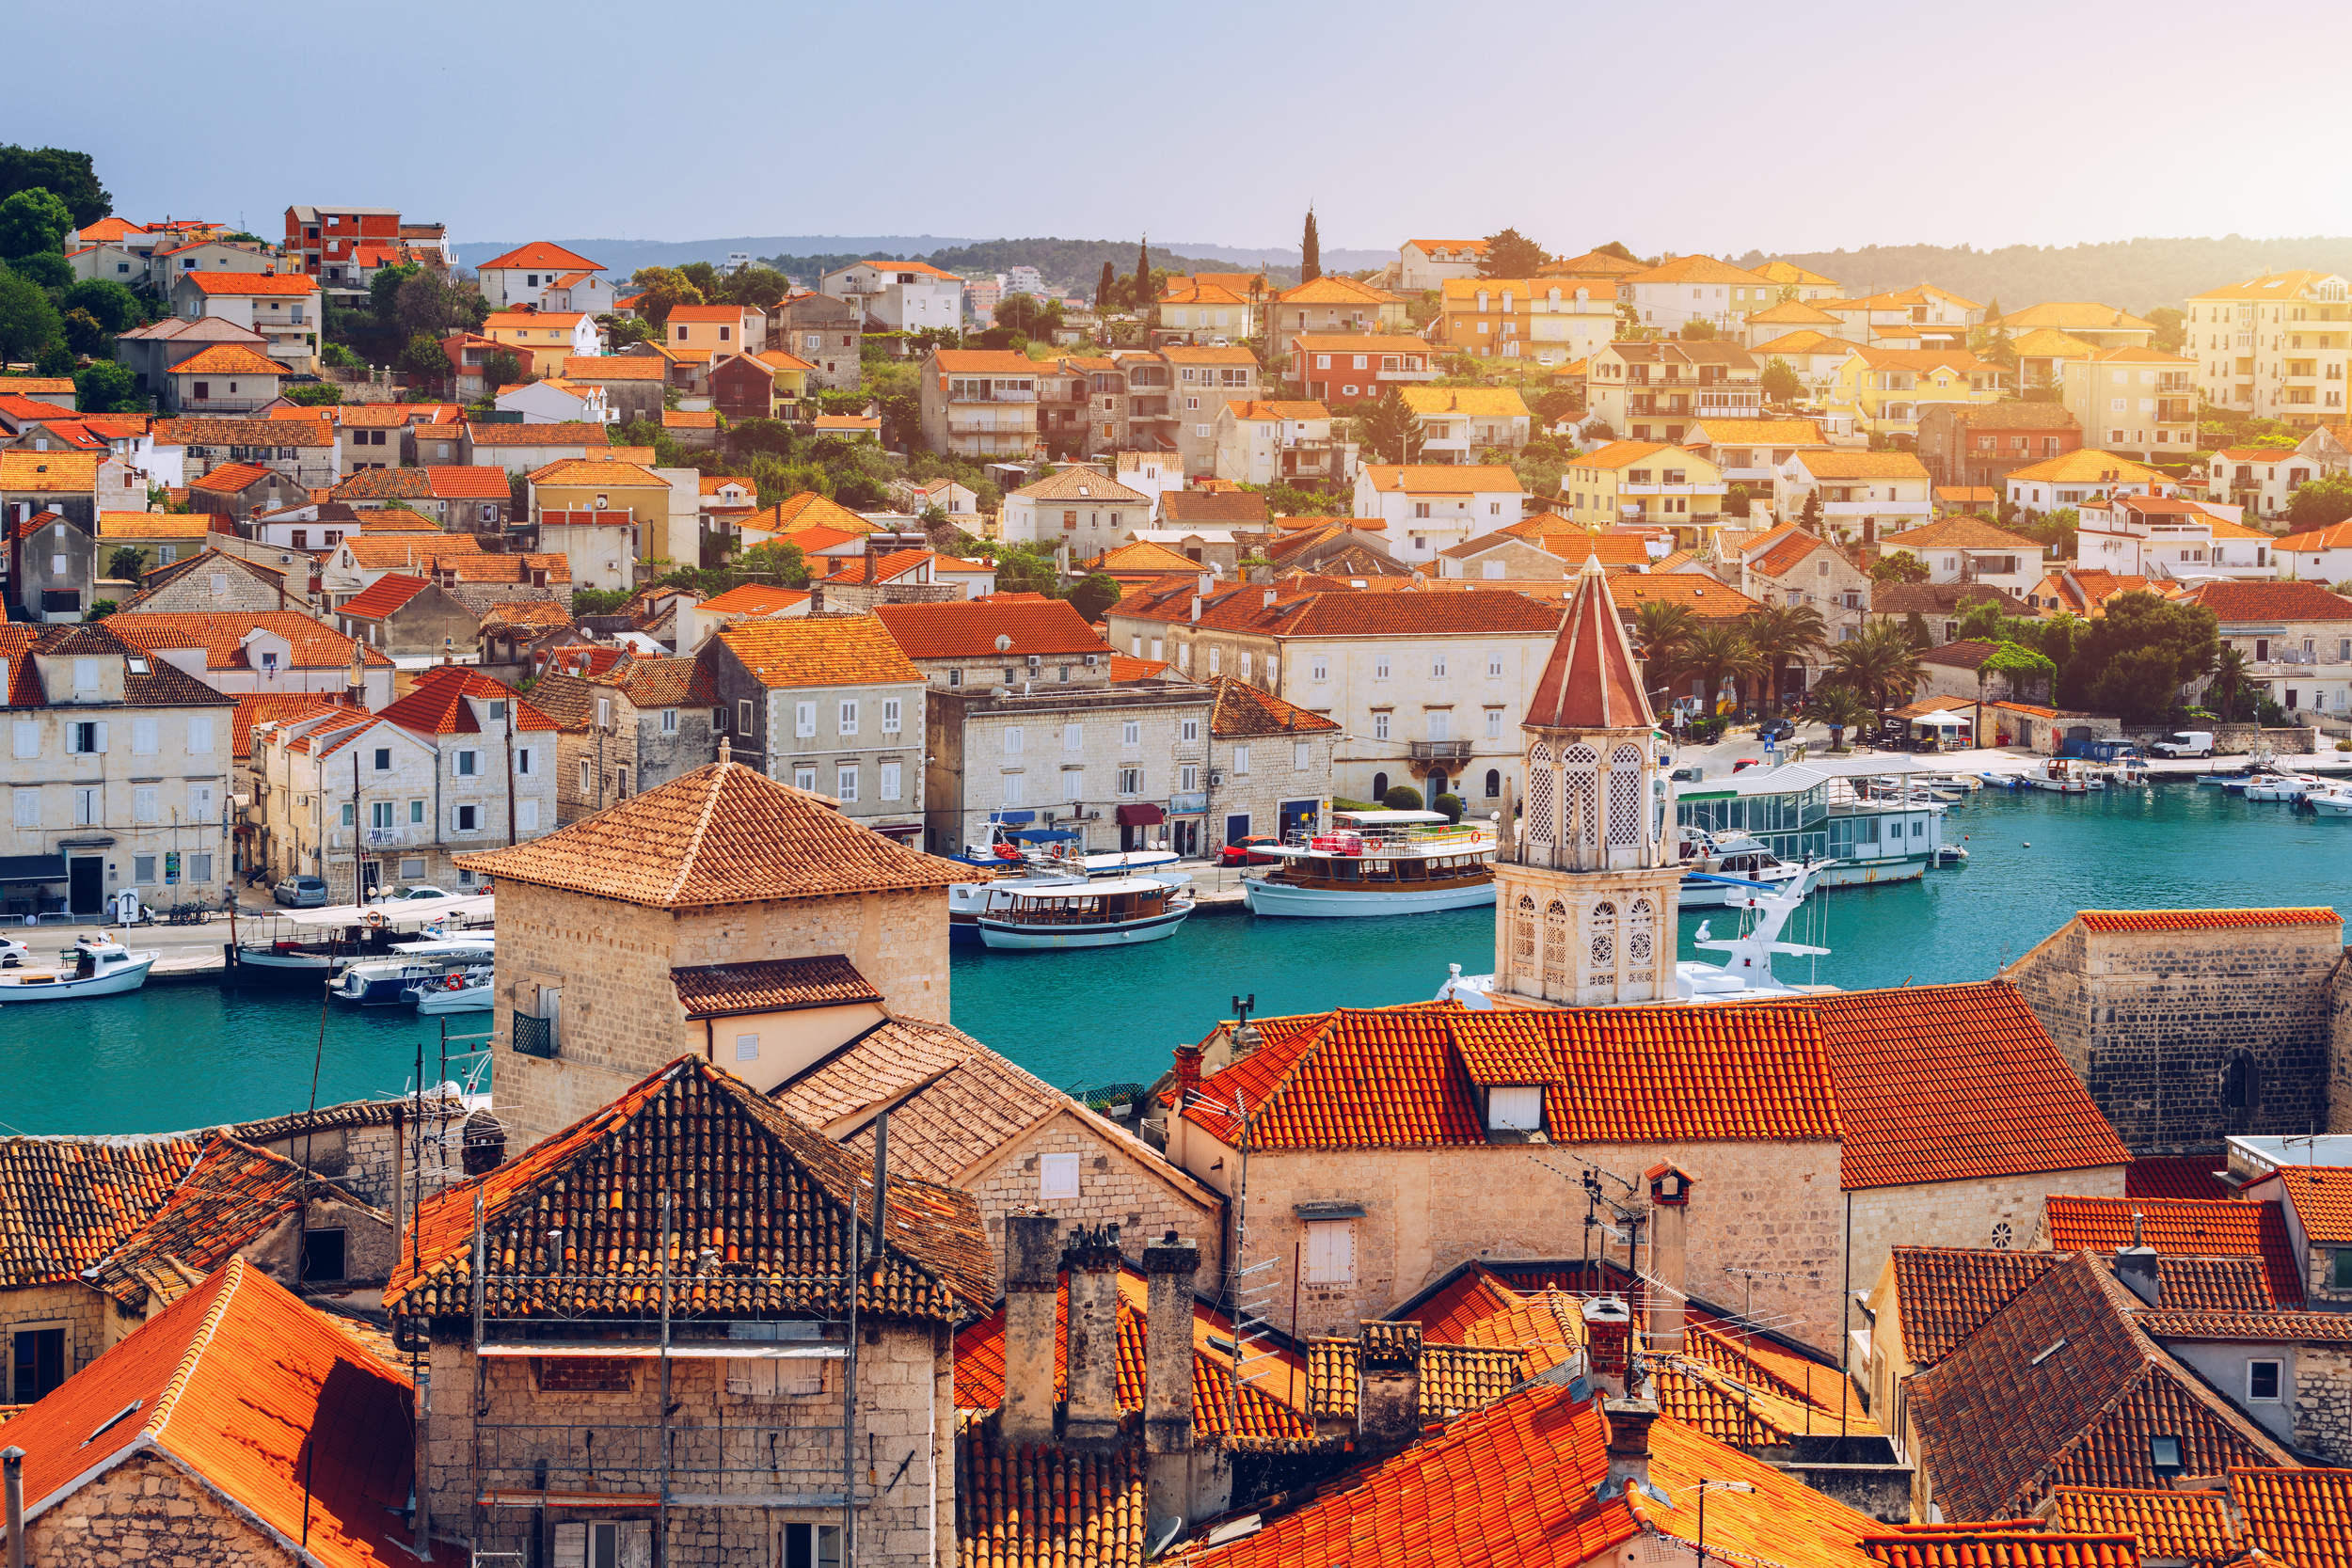 <p>For the perfect day trip from Split, book one of the many boat tours or ferries that stop in Trogir. Home to an exceptionally preserved Old Town that is UNESCO designated, there’s no shortage of picture-perfect scenes. There are also quite a few good cafes for such a small place.</p><p>You may also like: <a href='https://www.yardbarker.com/lifestyle/articles/20_quick_easy_crock_pot_dishes_you_can_make_on_gameday/s1__22916851'>20 quick & easy crock pot dishes you can make on gameday</a></p>